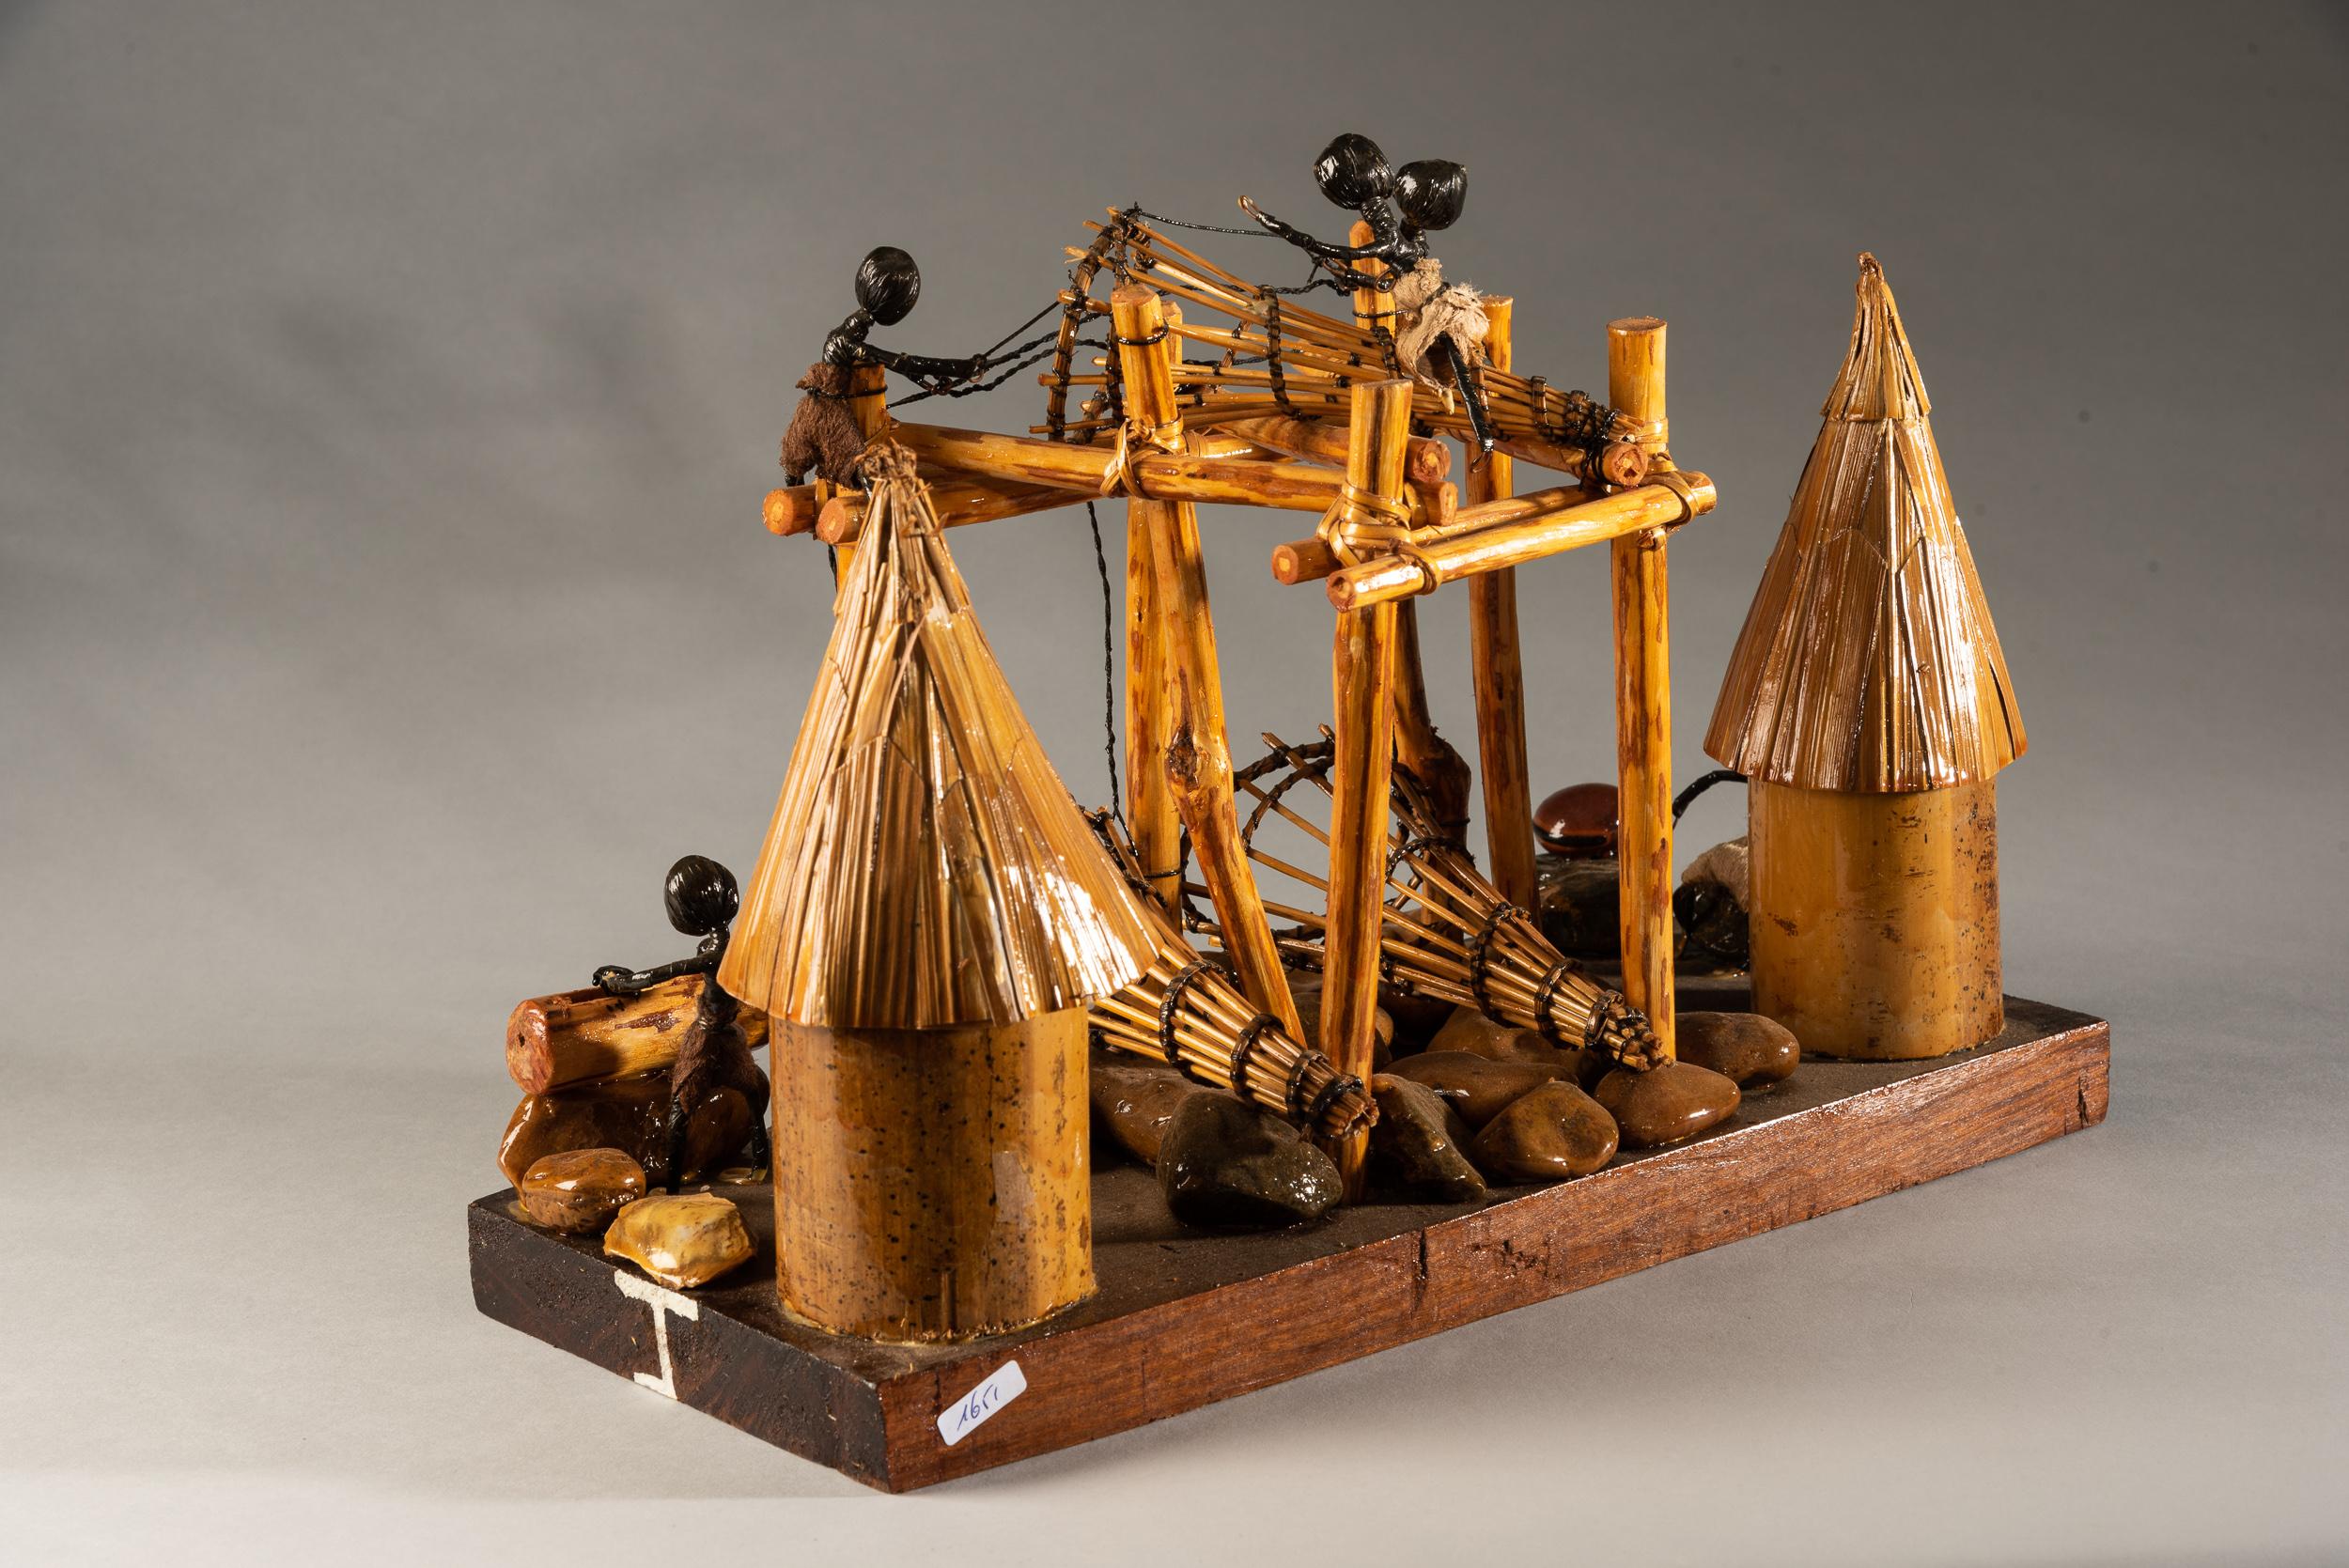 This is a tourist model of a Wagenia fishermen installation made out of wood, wire and small stones. The model stands on a wooden base; on the front you can read “Pecherie Wagenia” which is French for Wagenia Fishery at the edge of Kisangani by the